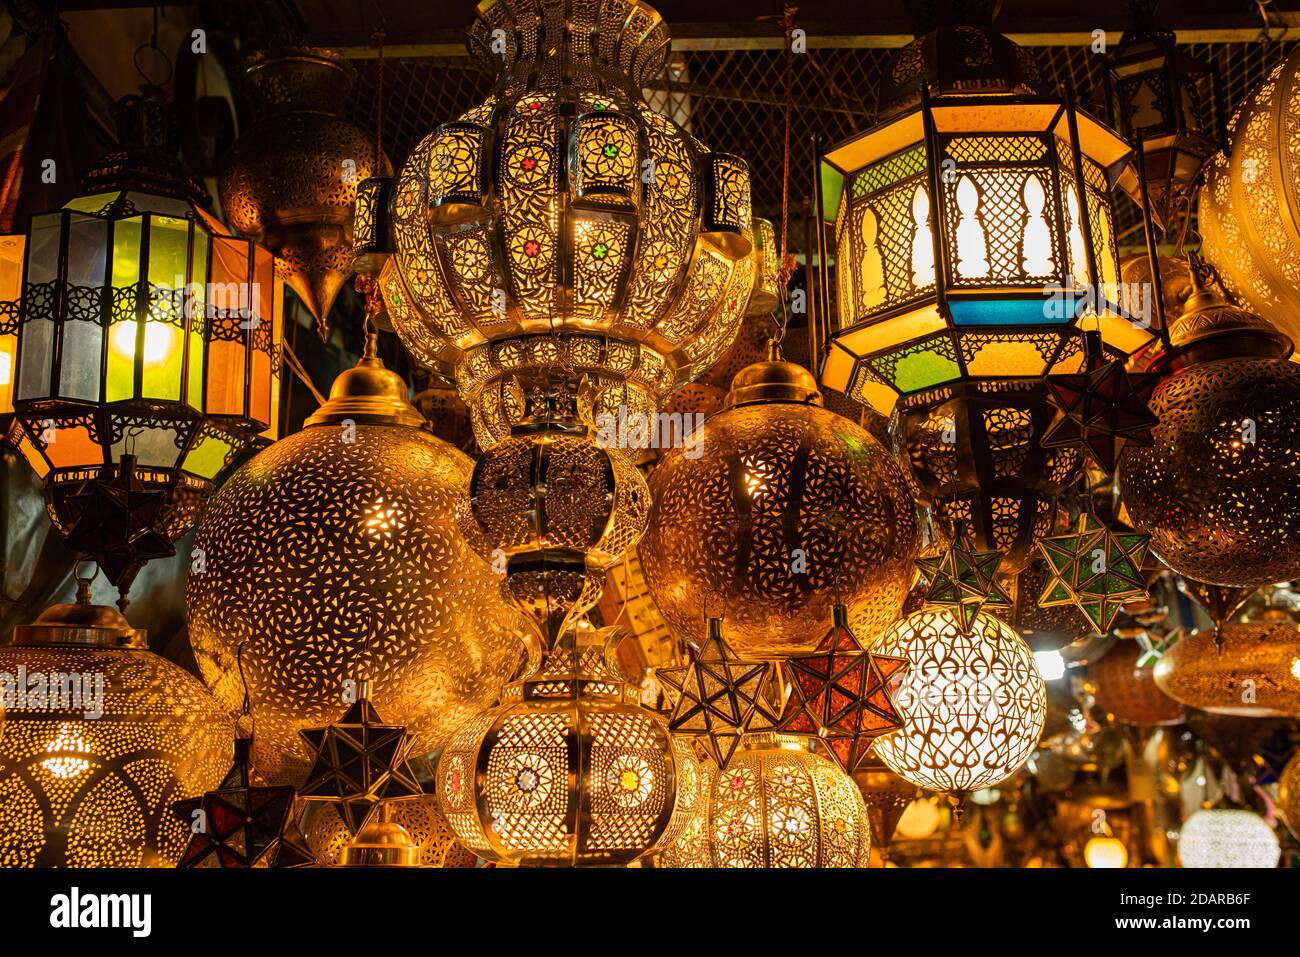 Various lamps made of brass or copper and colored glass for sale hung up, souk, bazaar, Marrakech, Morocco Stock Photo